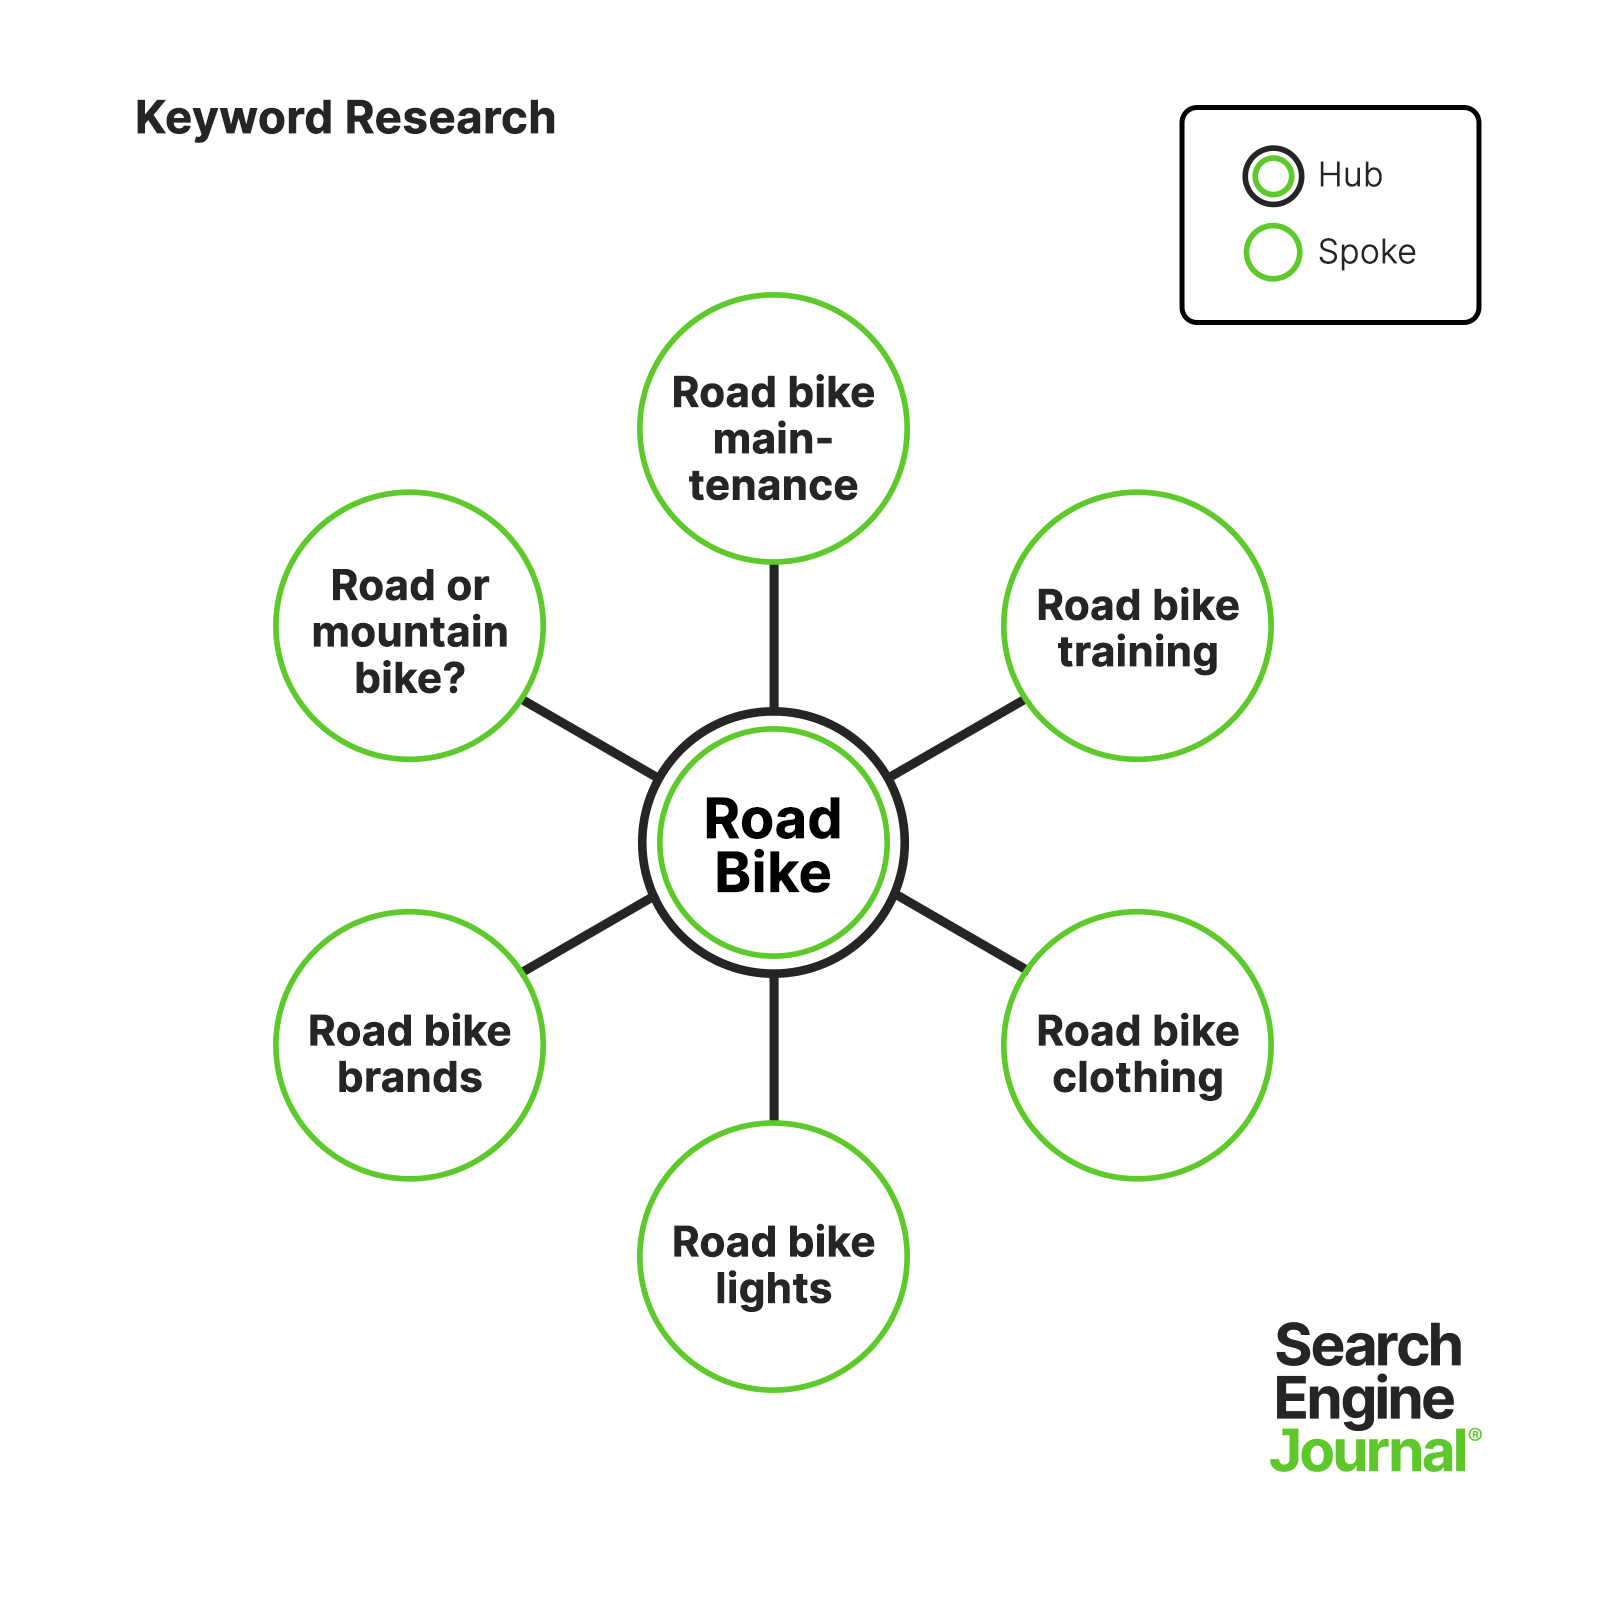 where do keywords go in a research paper